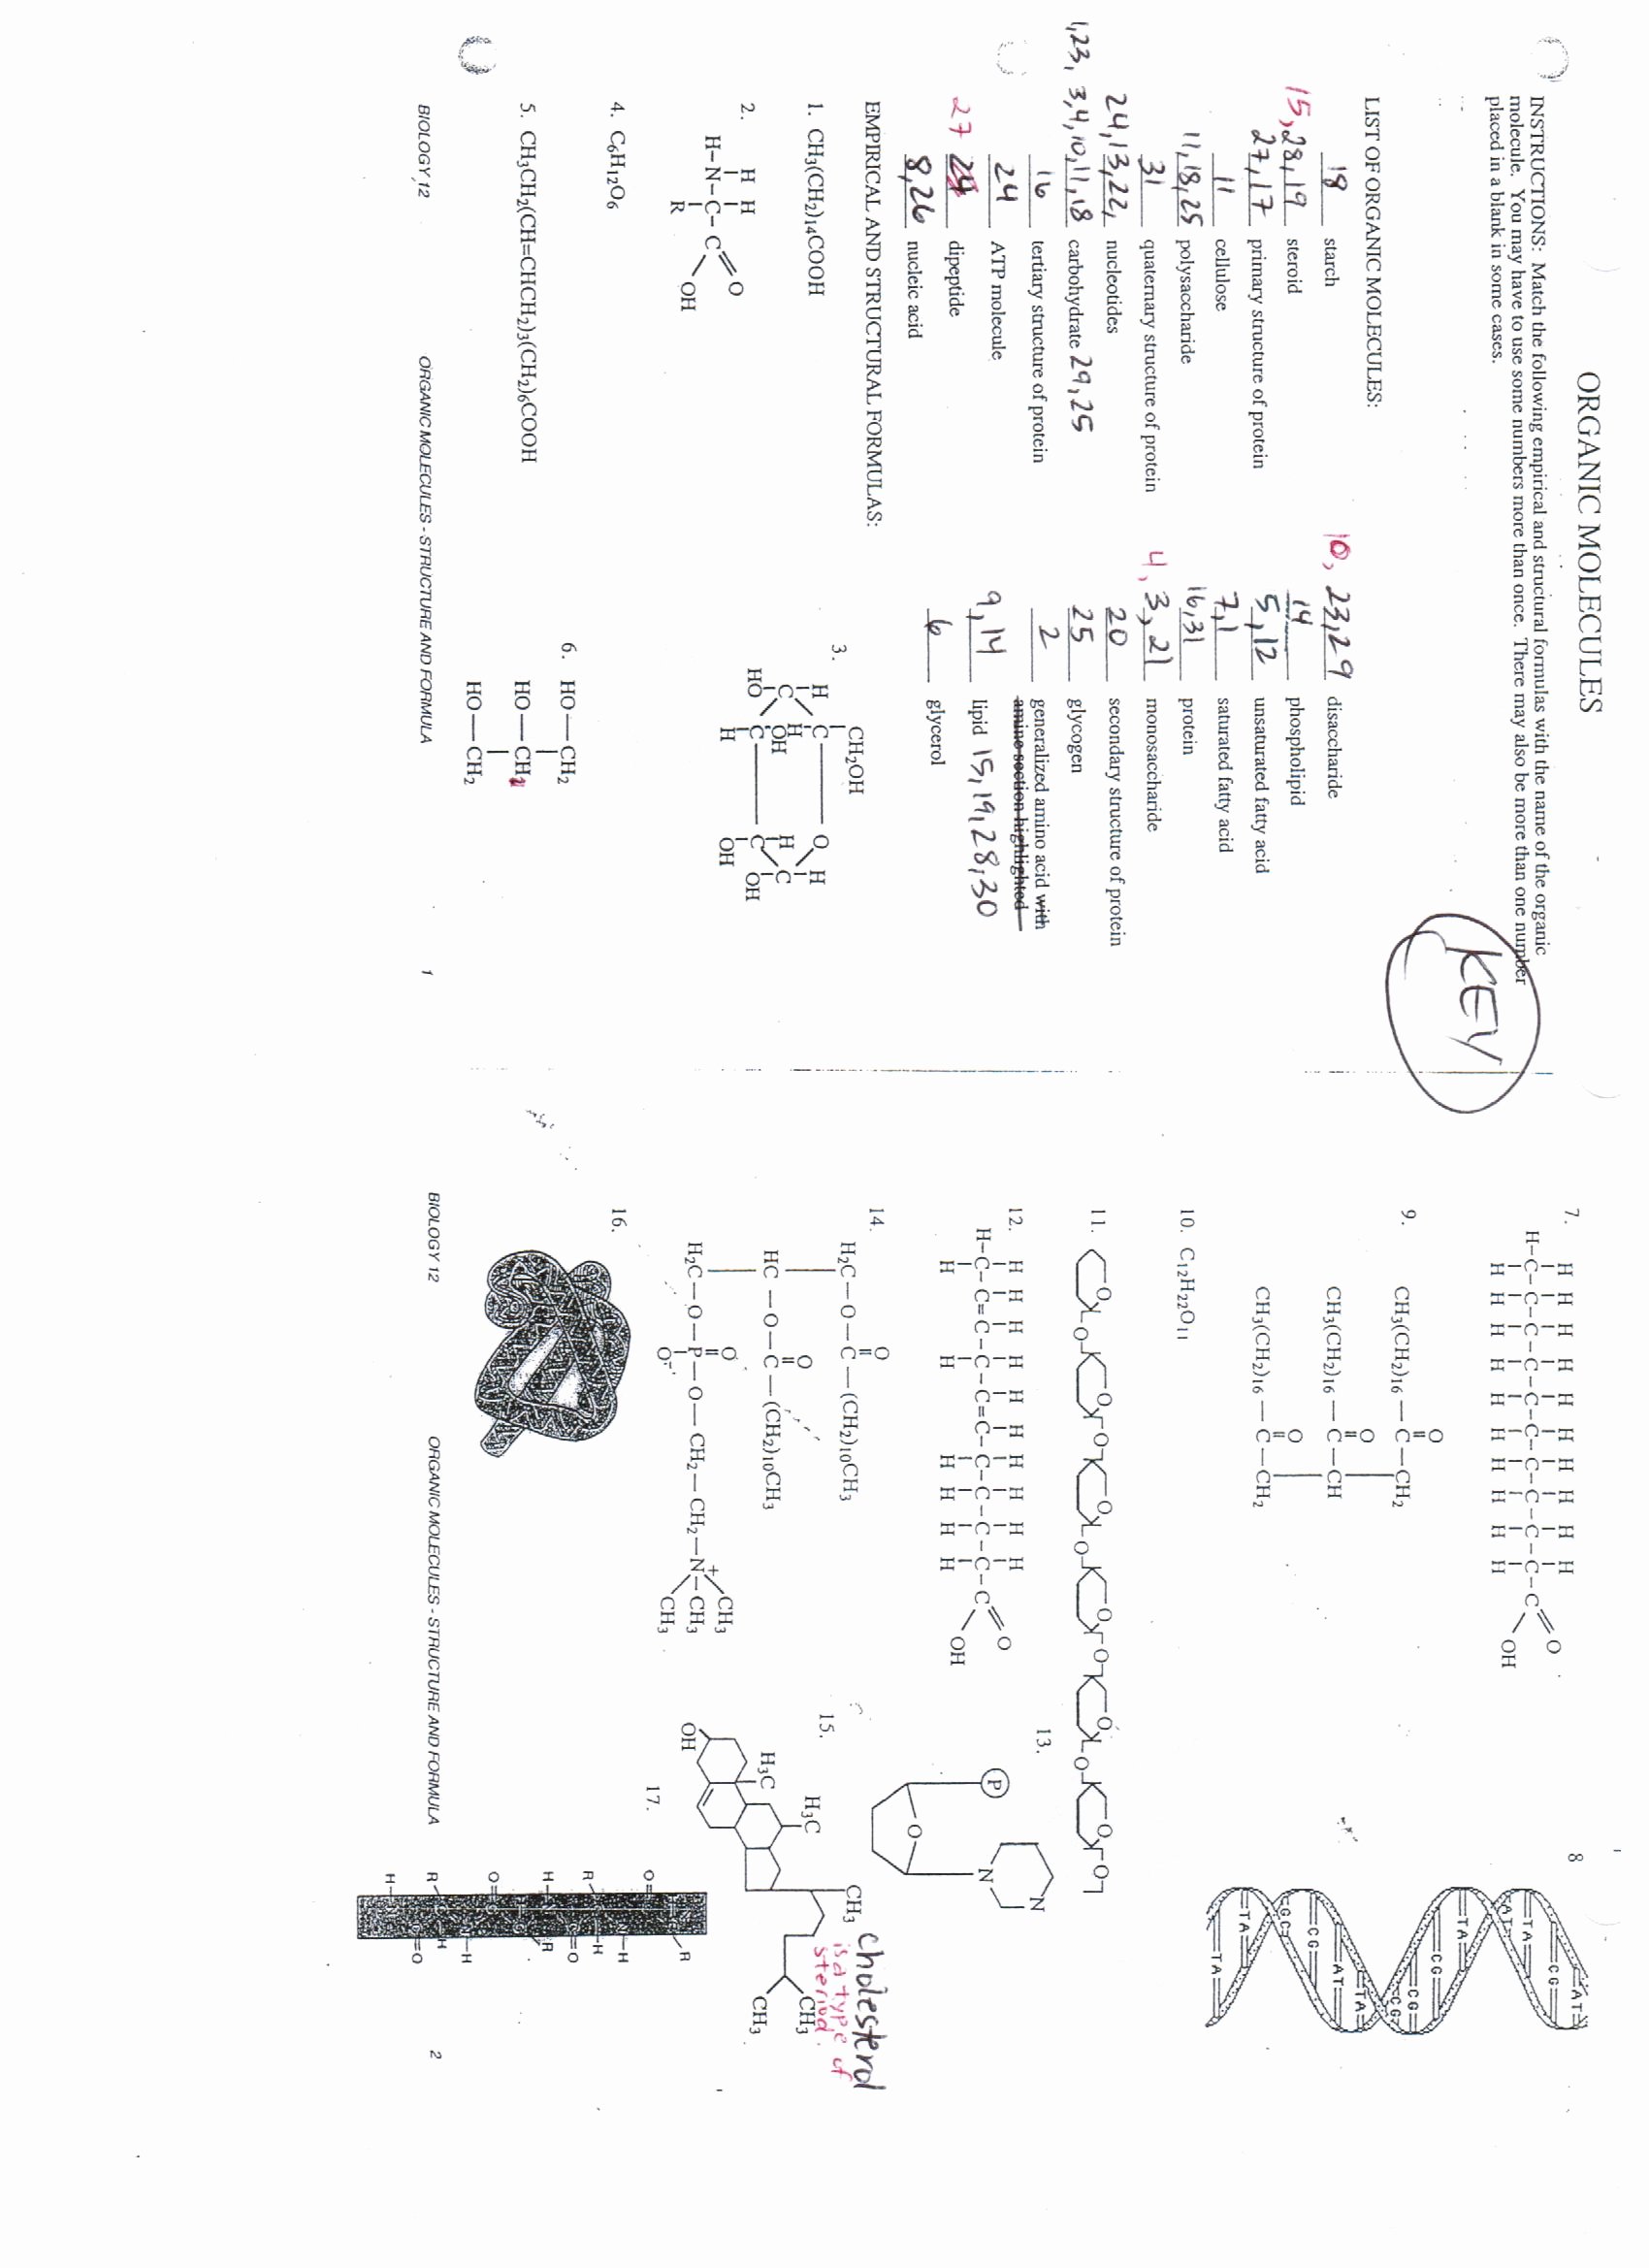 Nucleic Acid Worksheet Answers Fresh Answers Lipids Nucleic Acids and organic Molecules